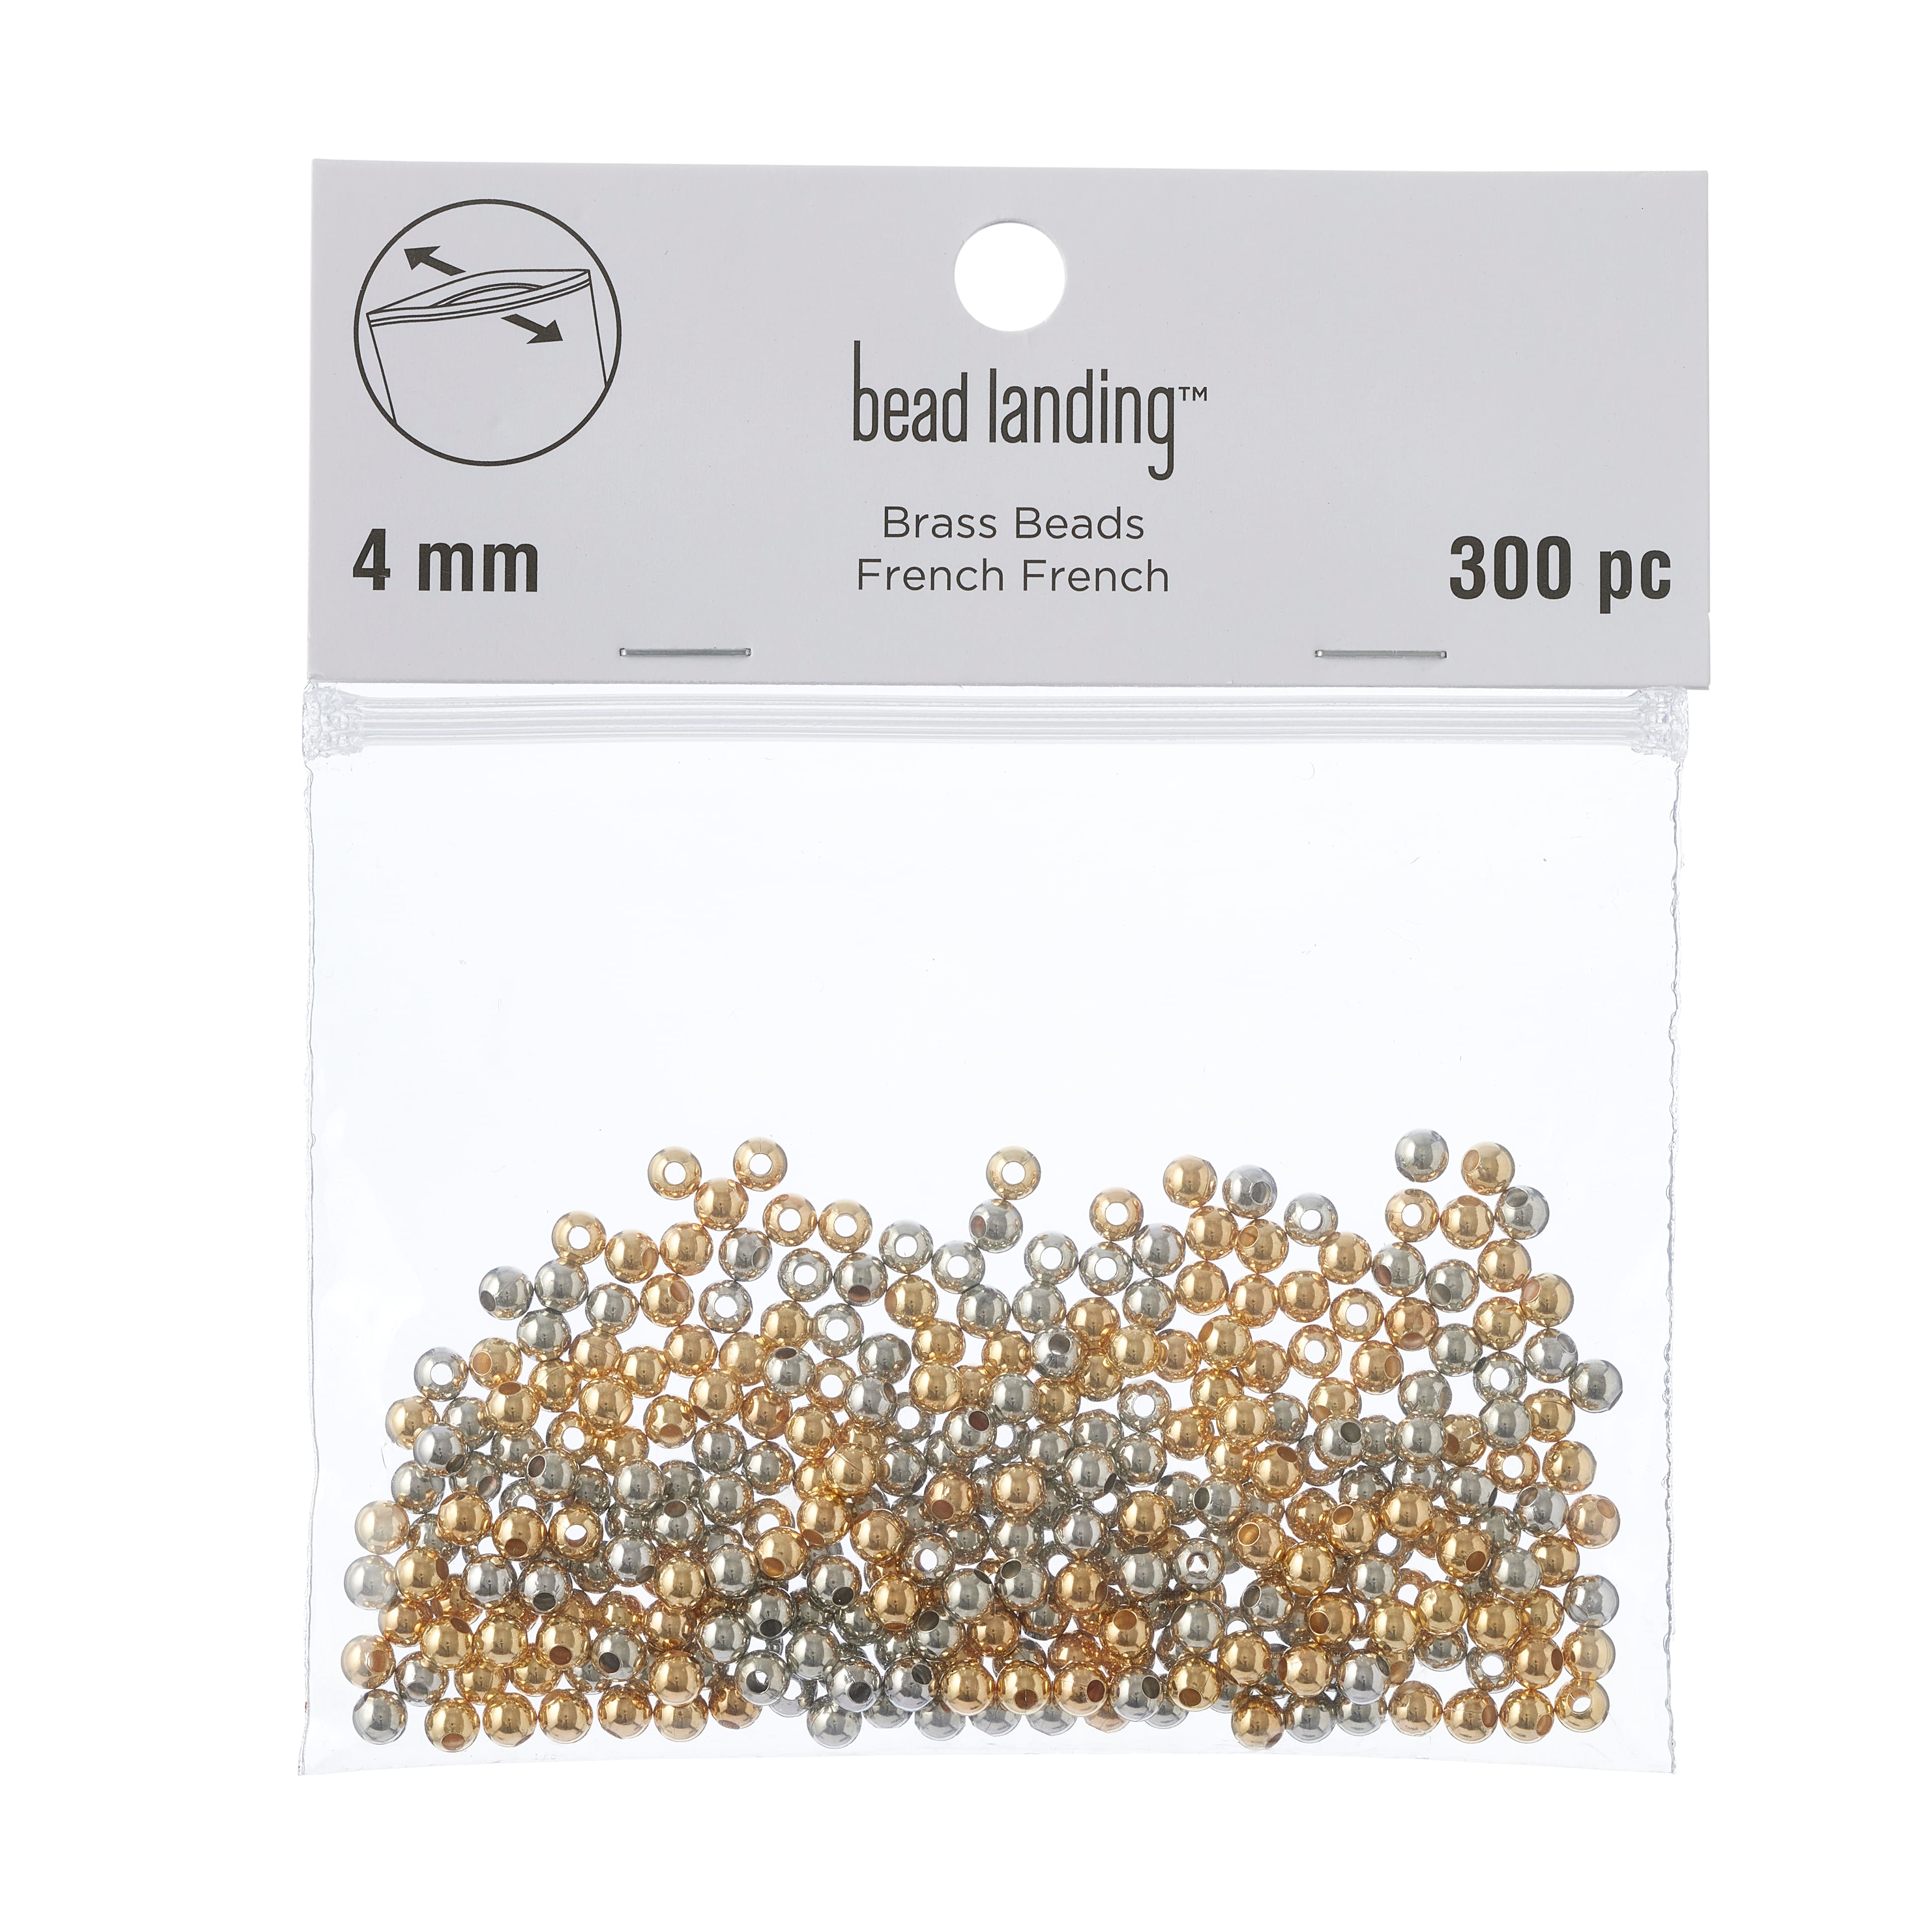 Mandala Craft Metal Spacer Beads for Jewelry Making Bulk Pack – Round Silver Spacer Beads Gold Beads – 4mm 5mm Bead Spacers for Jewelry Making 1500